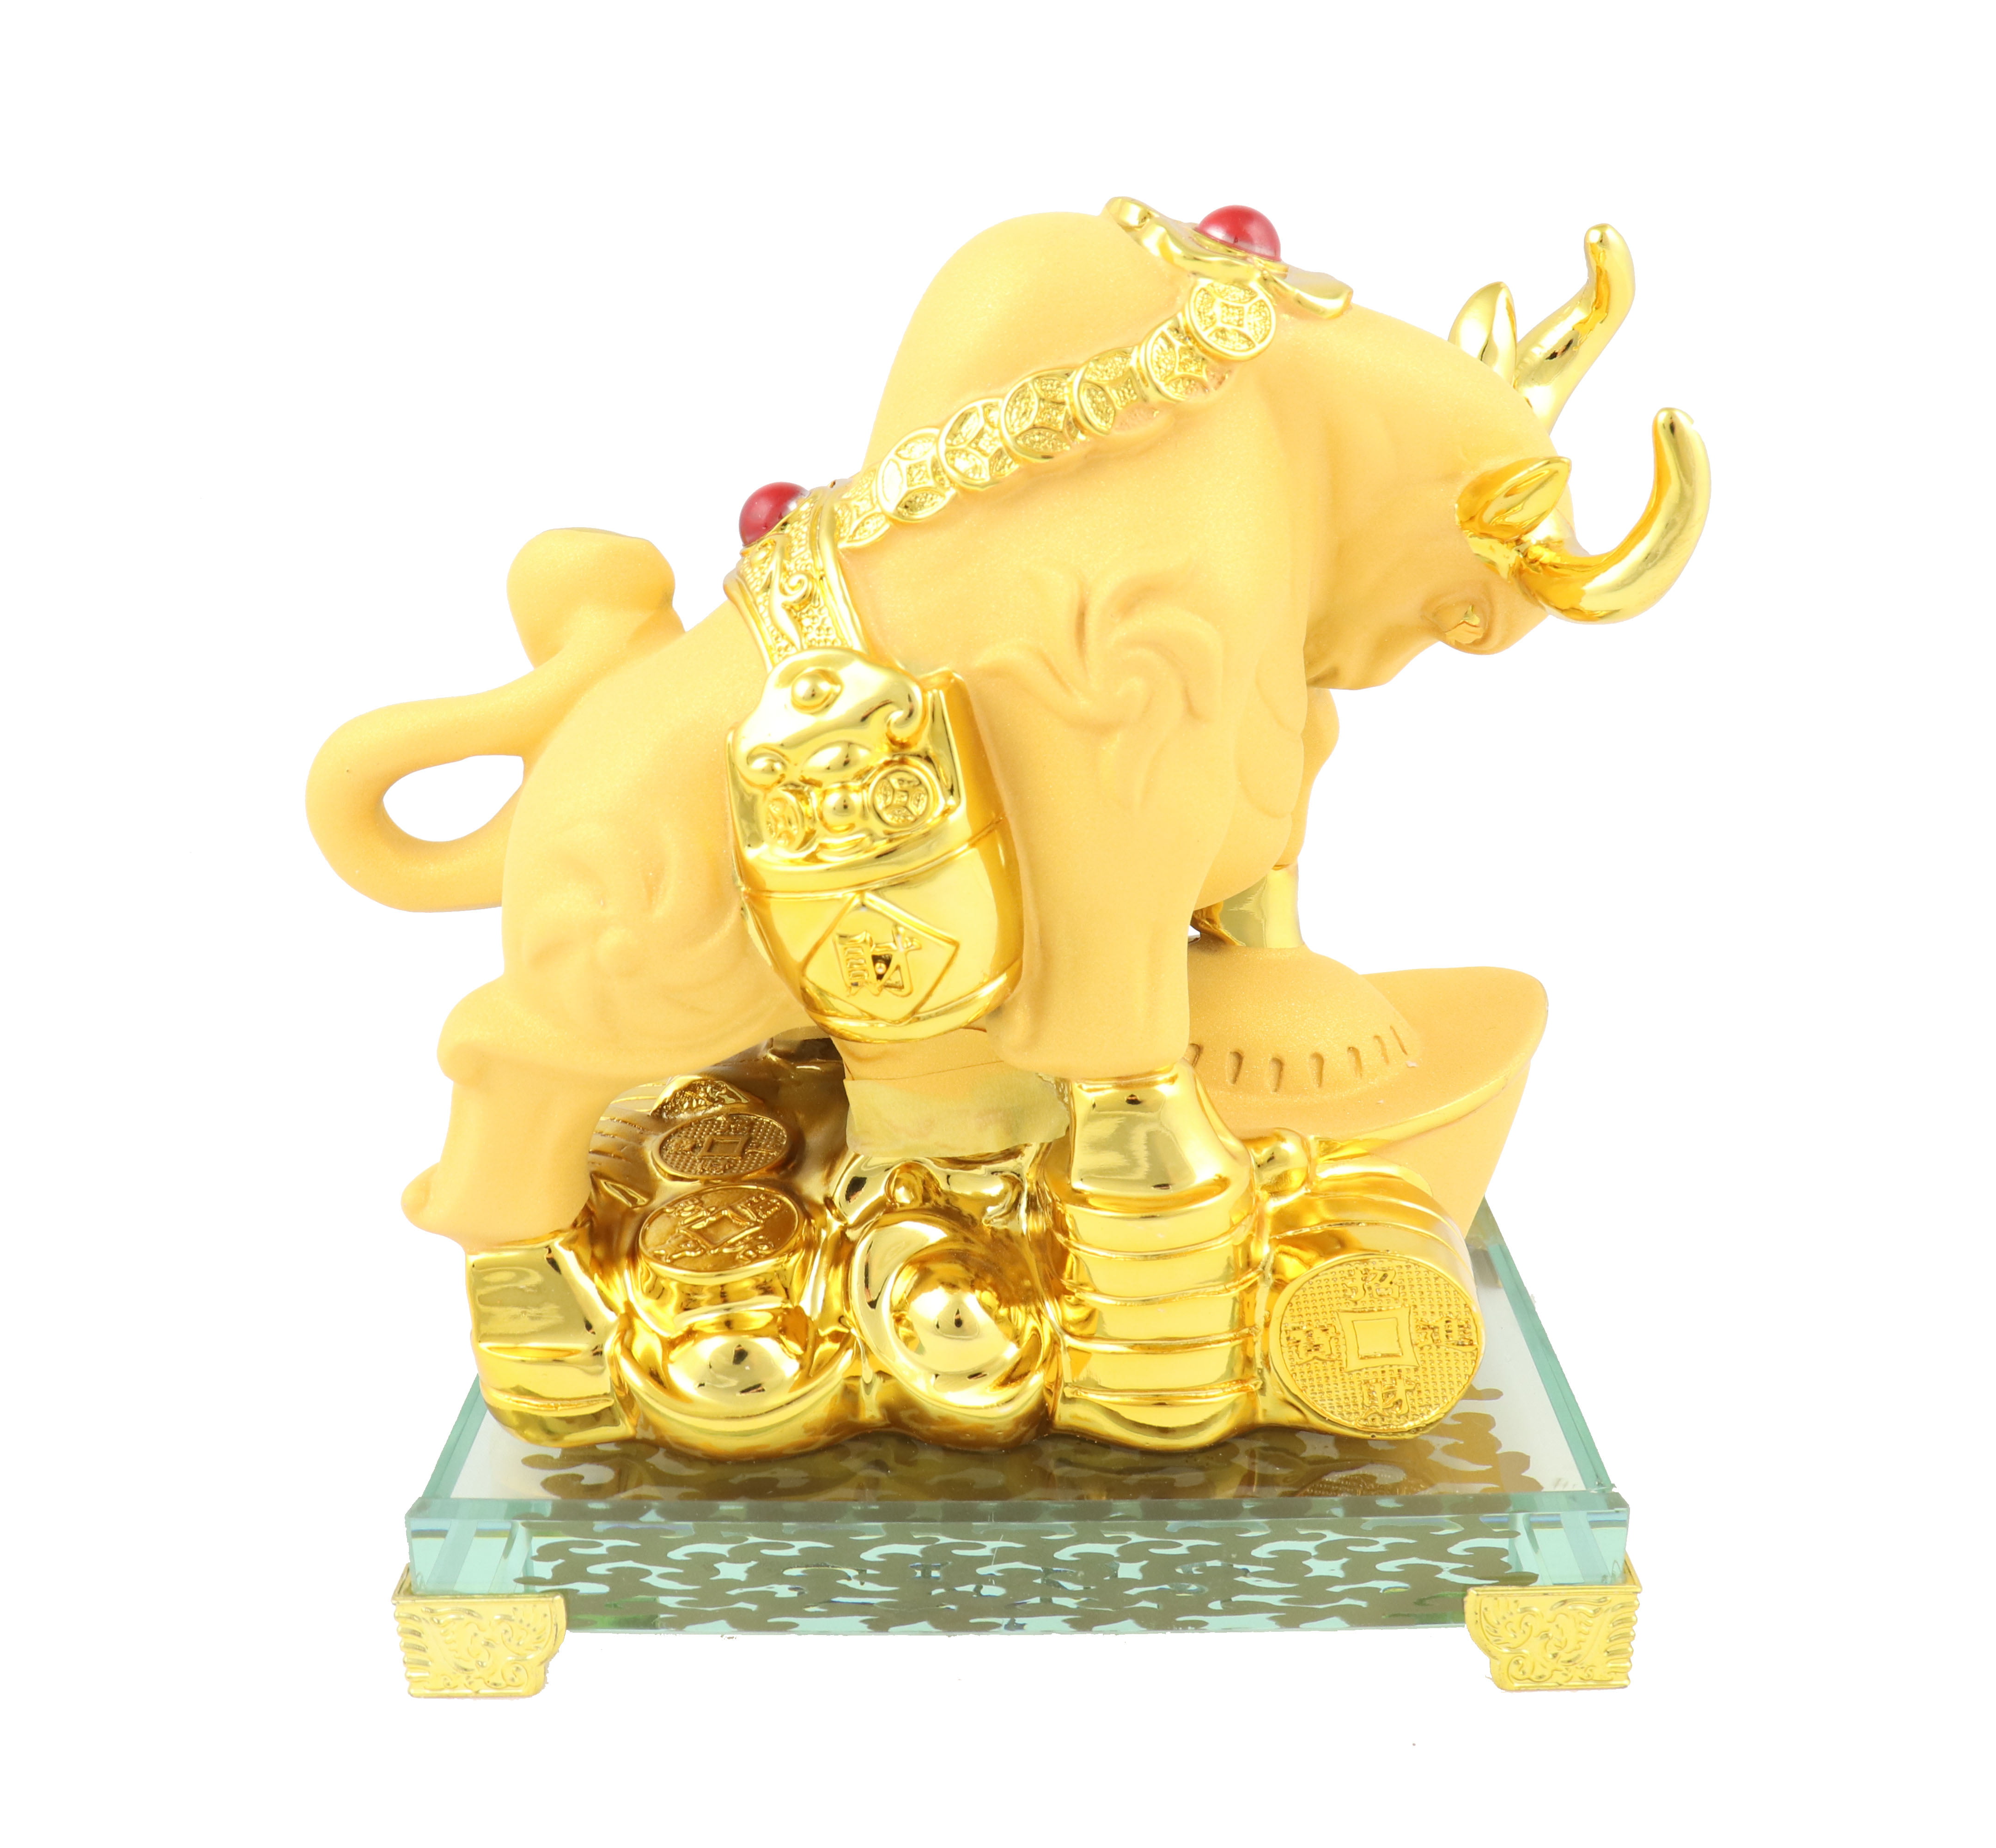 Golden Ox Statue on Big Ingot for the Year of the Ox 2021 